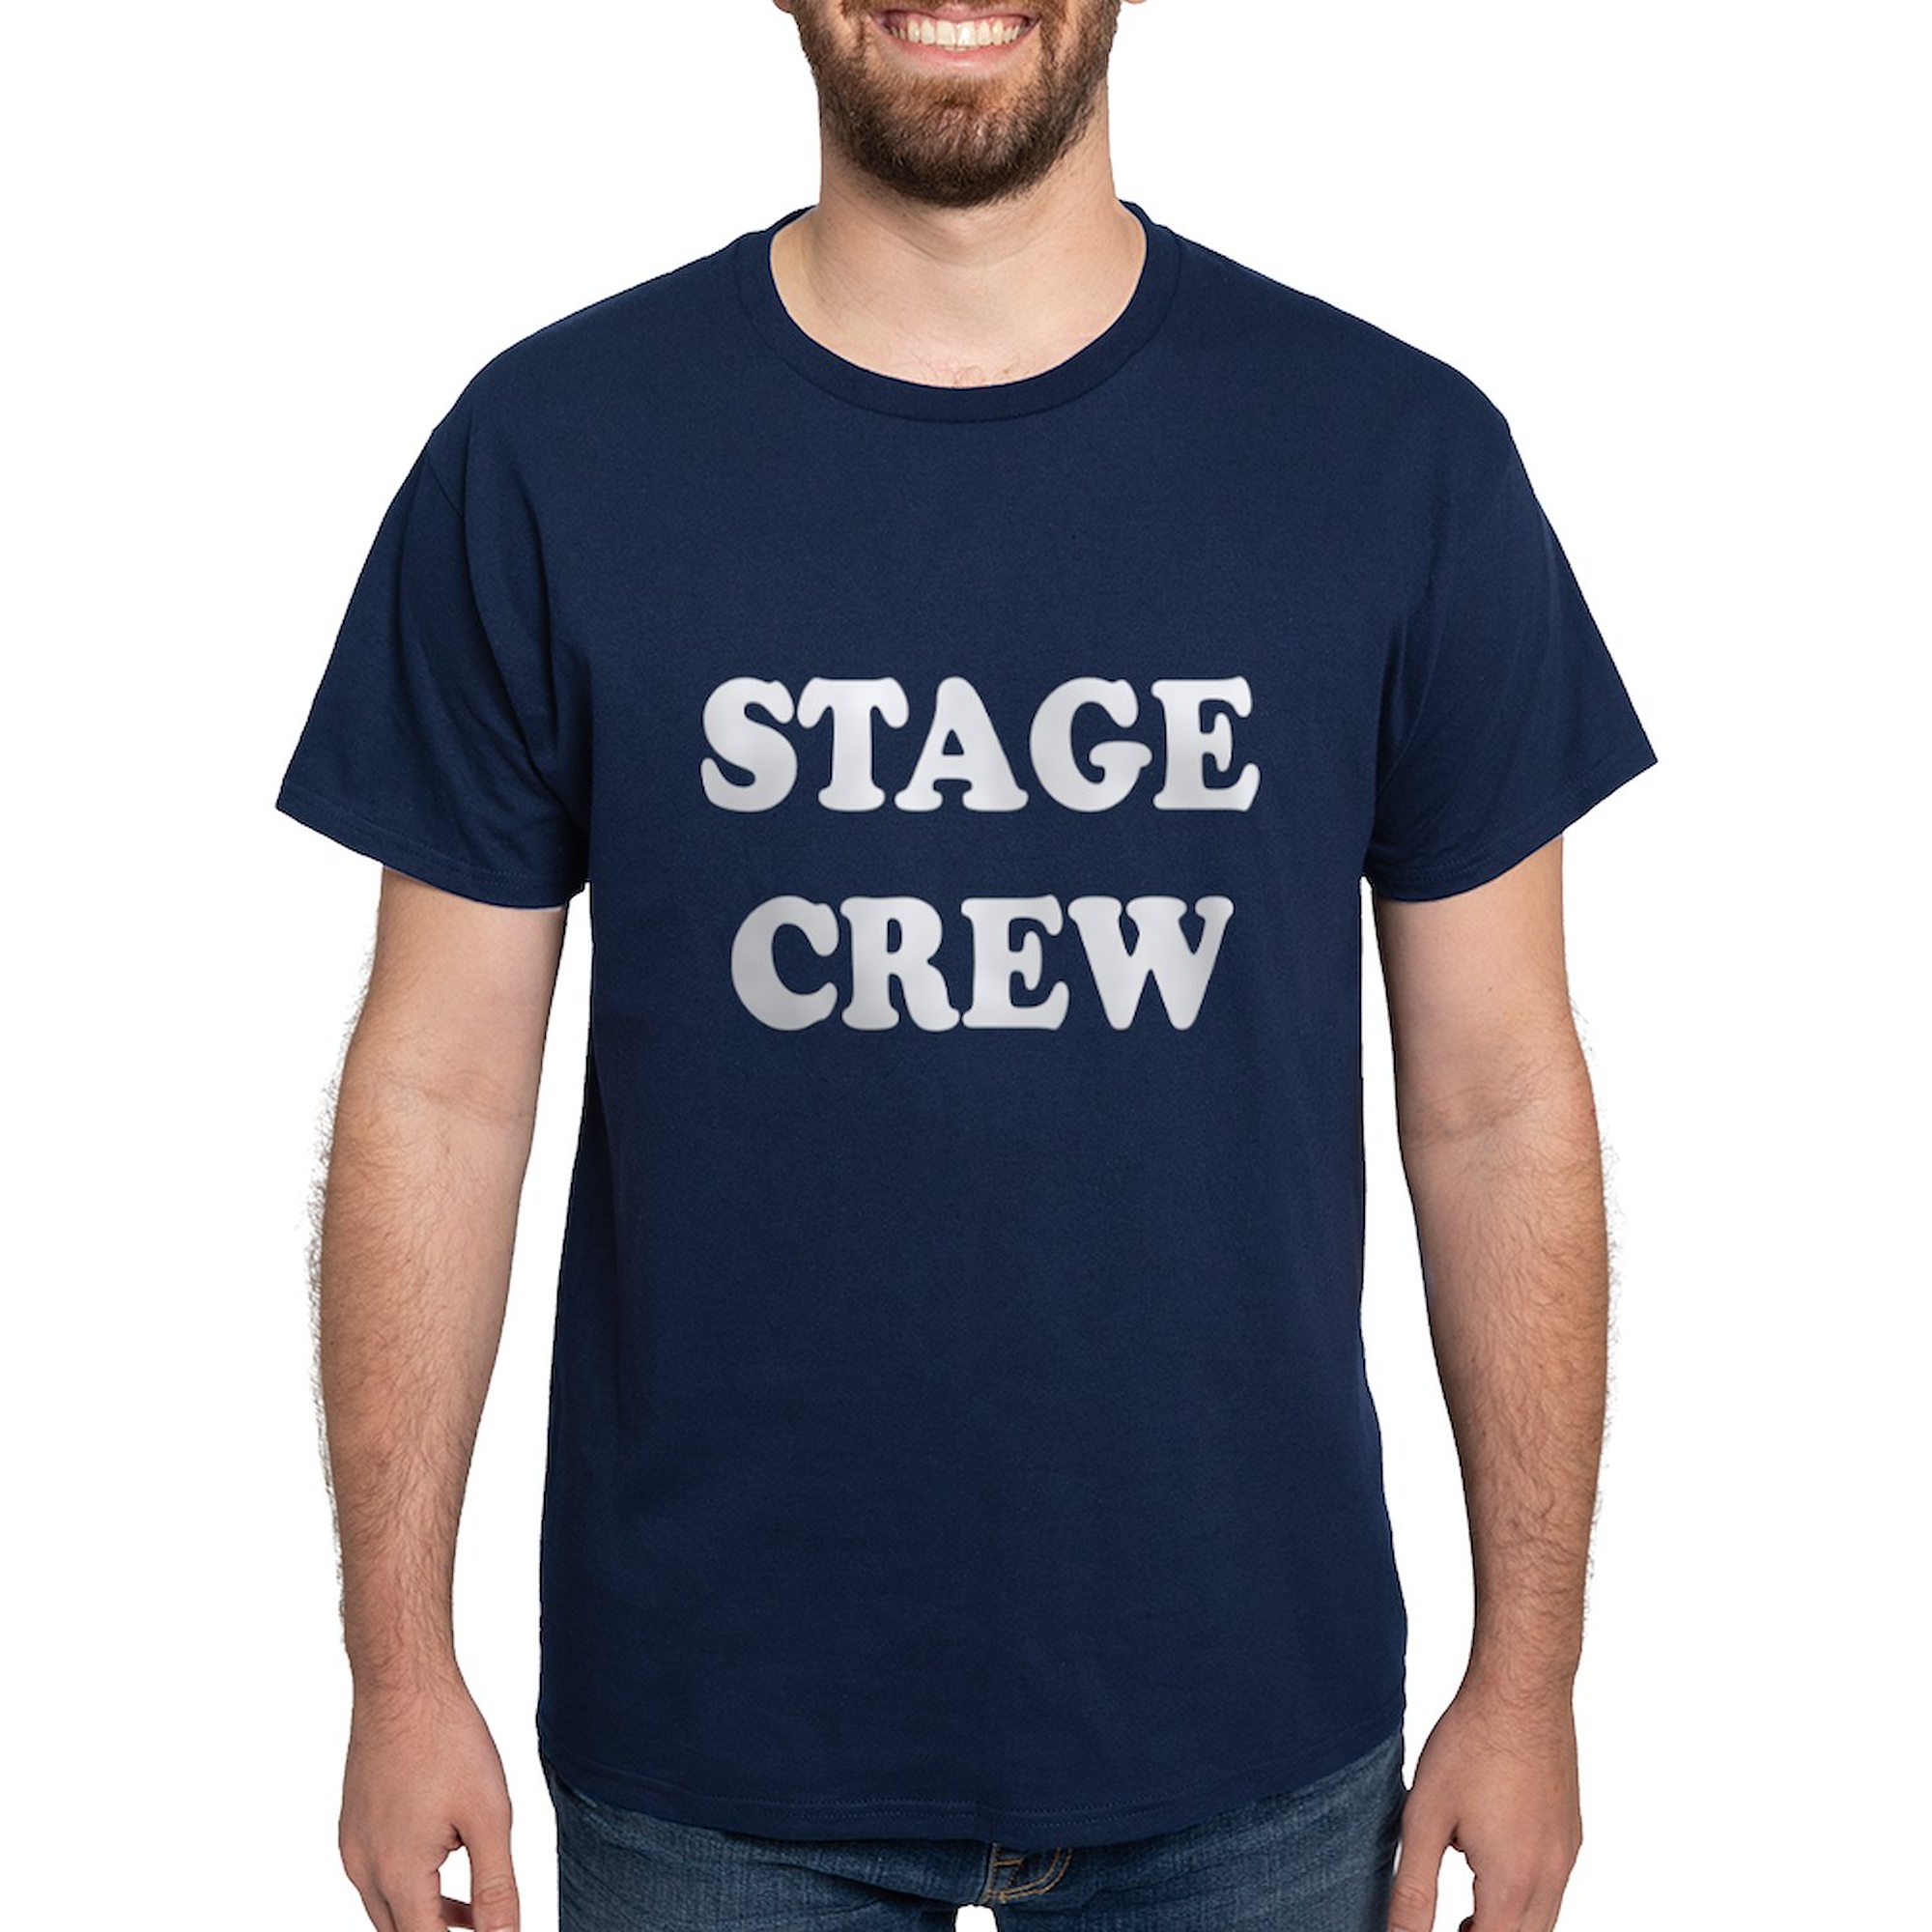 CafePress - Stage Crew White T Shirt - 100% Cotton T-Shirt - image 1 of 4